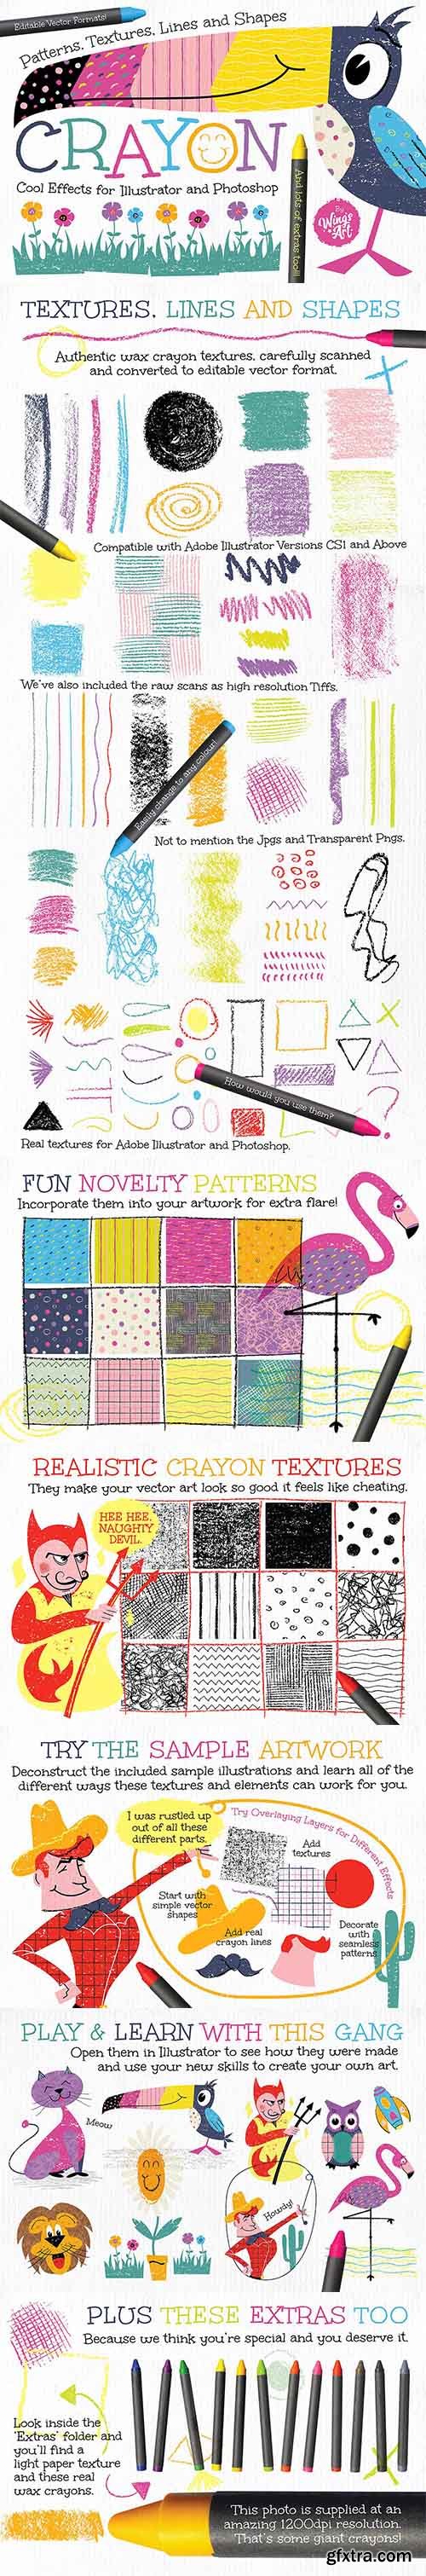 Wax Crayon Patterns and Textures - CM 1409141